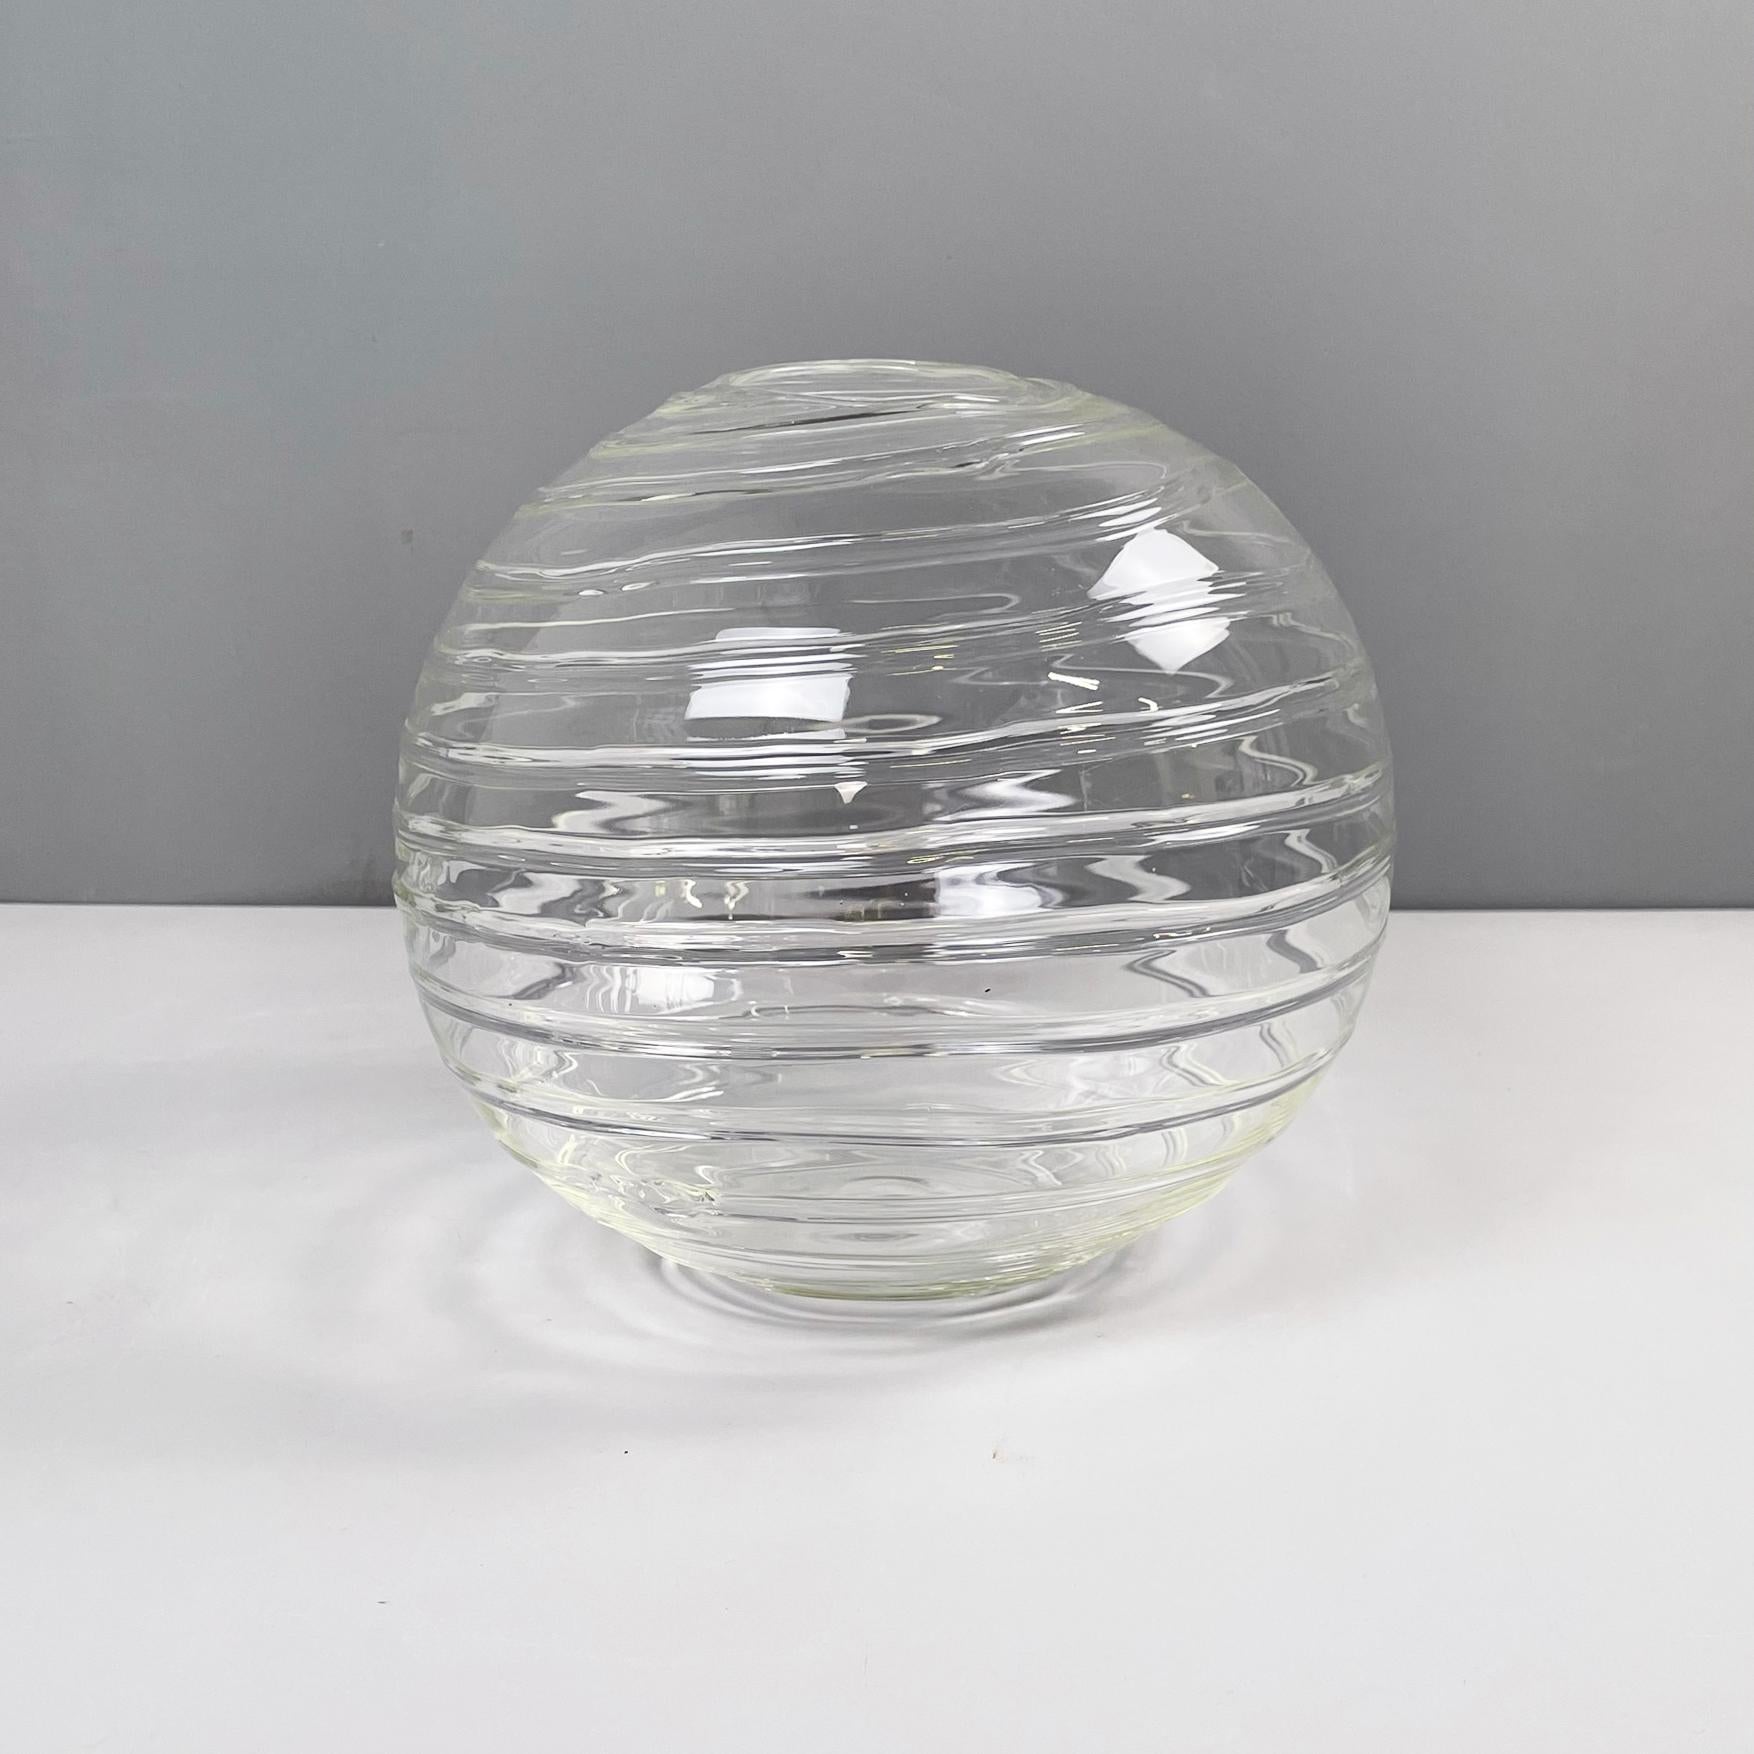 Italian modern Glass vase with round shape and spiral by Roberto Faccioli, 1990s
Round base vase in finely handcrafted glass. The spherical structure has a spiral over its entire surface.
Designed and produced by Roberto Faccioli in 1990s.
Very good